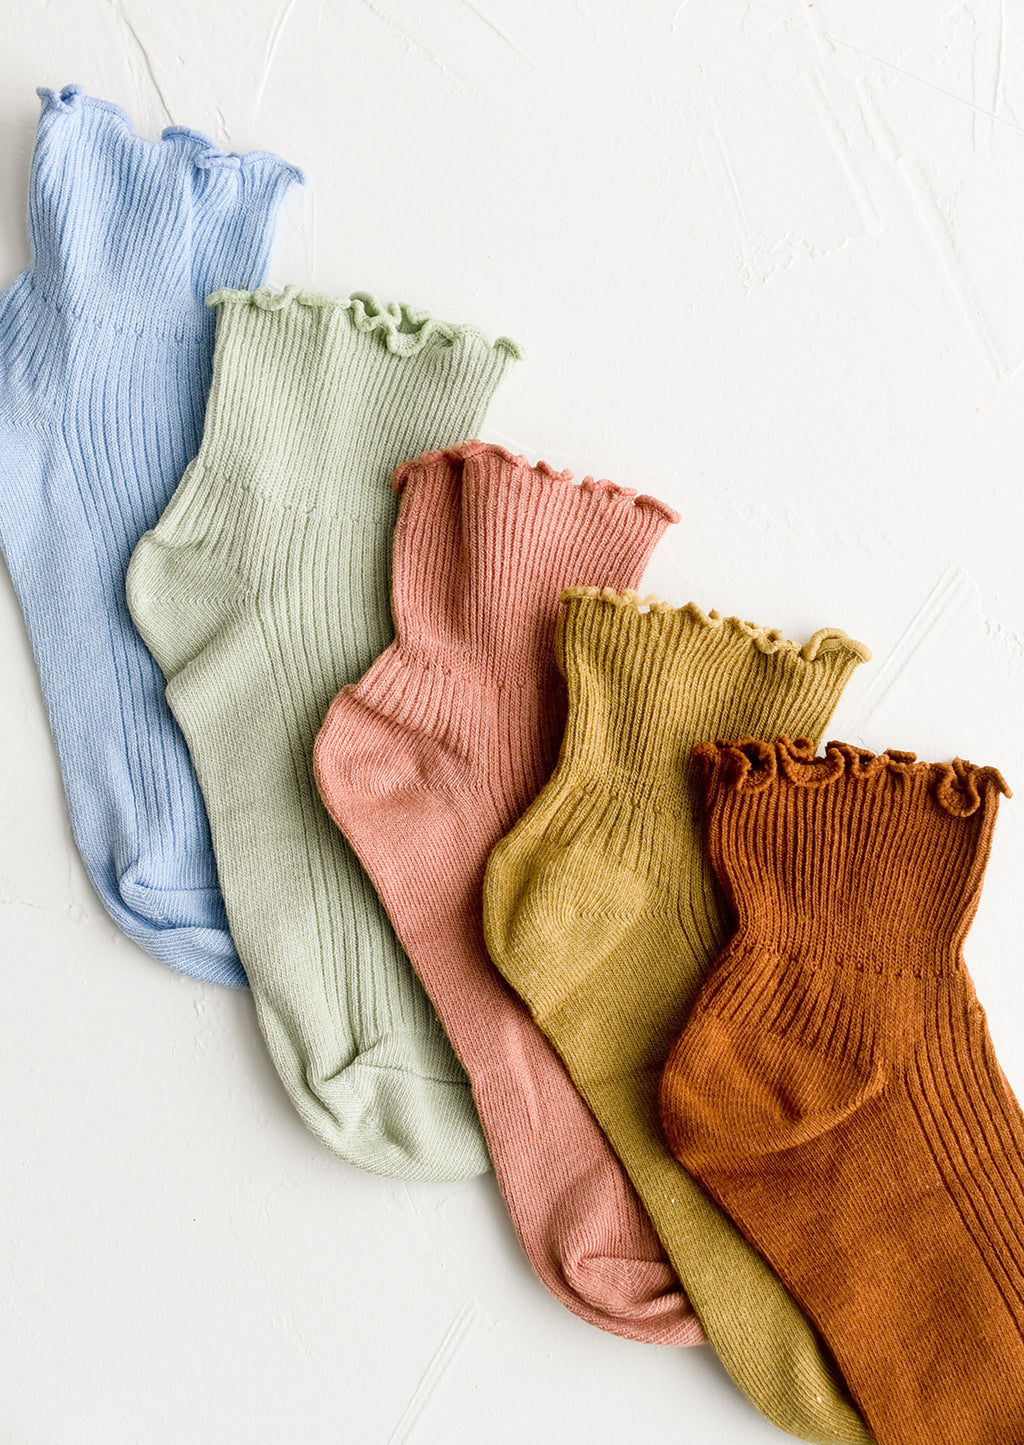 1: Ankle socks in assorted colors.